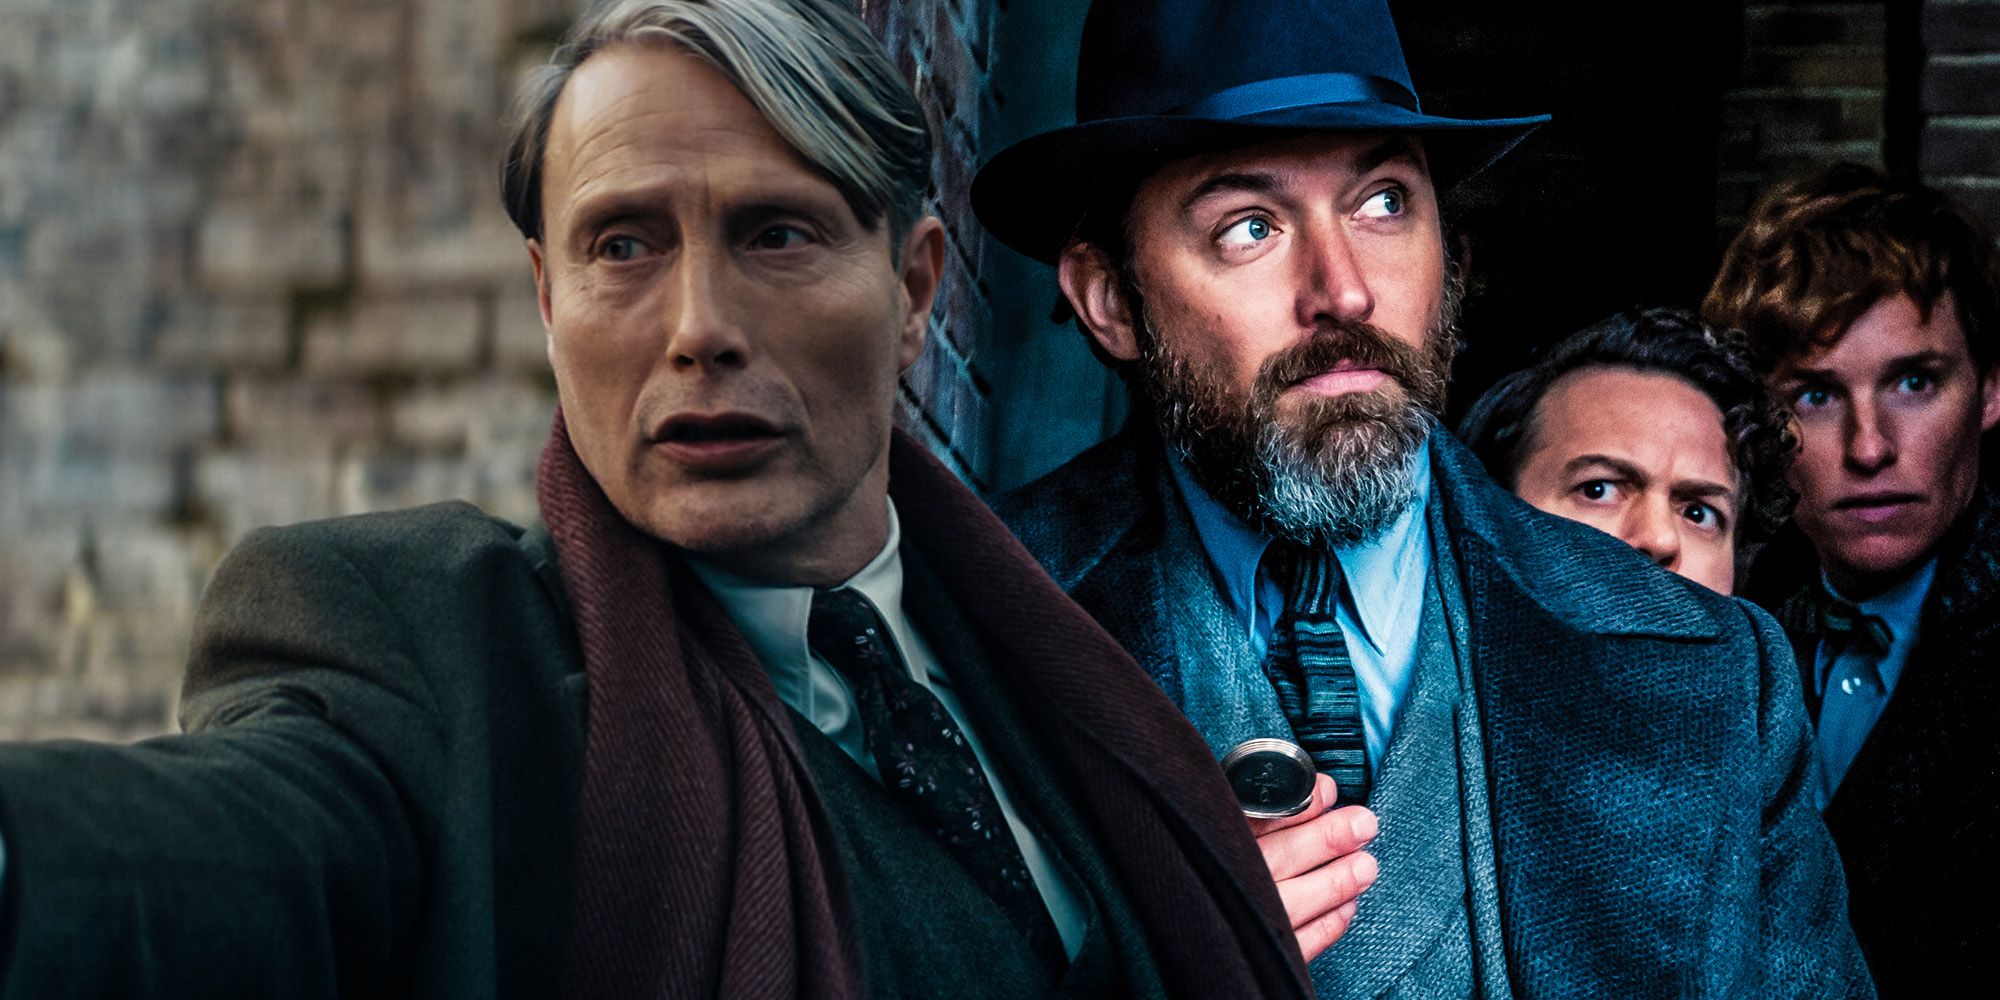 An image of Grindelwald and Dumbledore in Fantastic Beasts 3